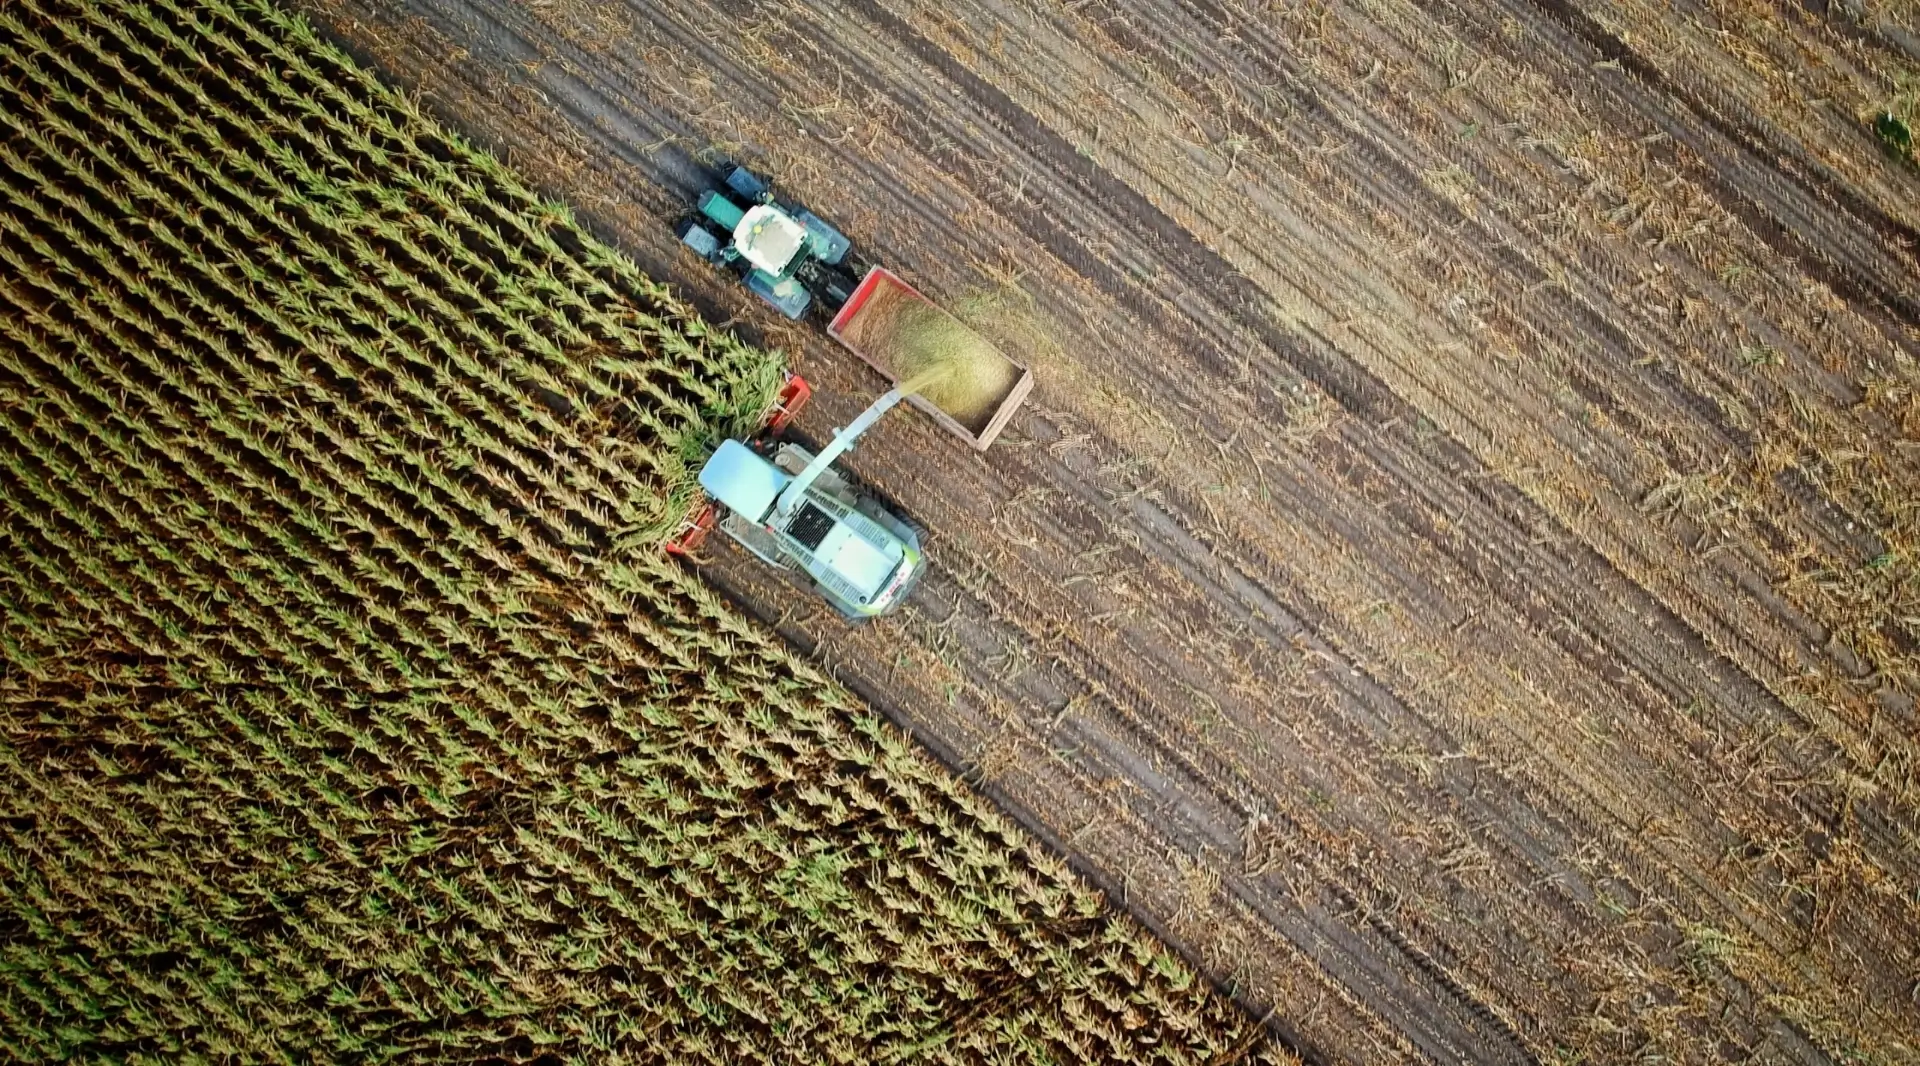 An aerial view of an agriculture combine harvester in a corn field.